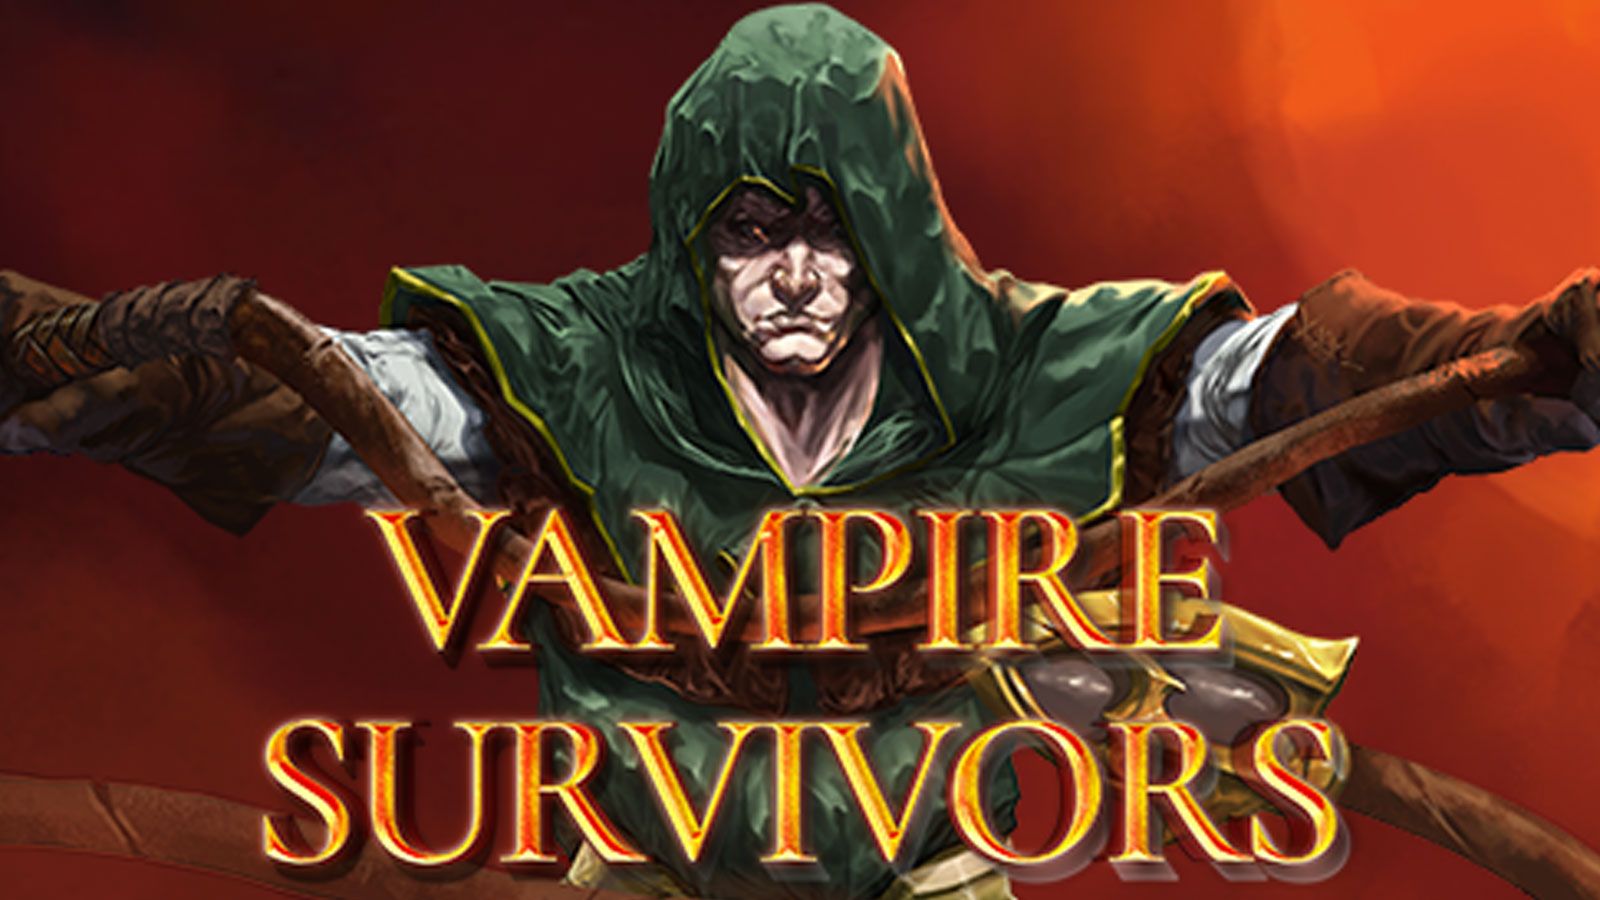 How to unlock everything in Vampire Survivors patch 0.7.3